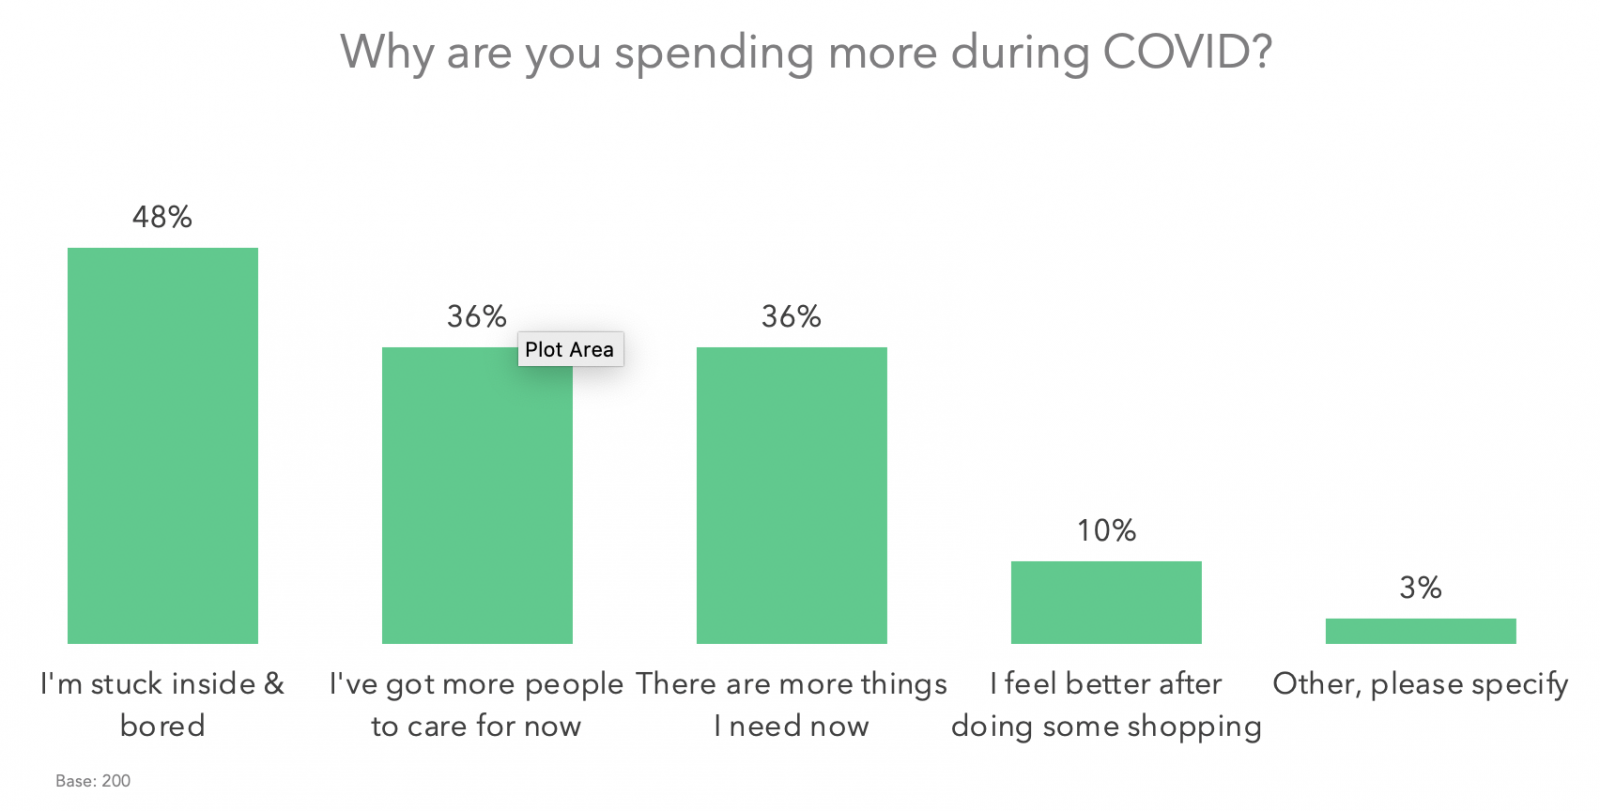 Why are you spending more during COVID?